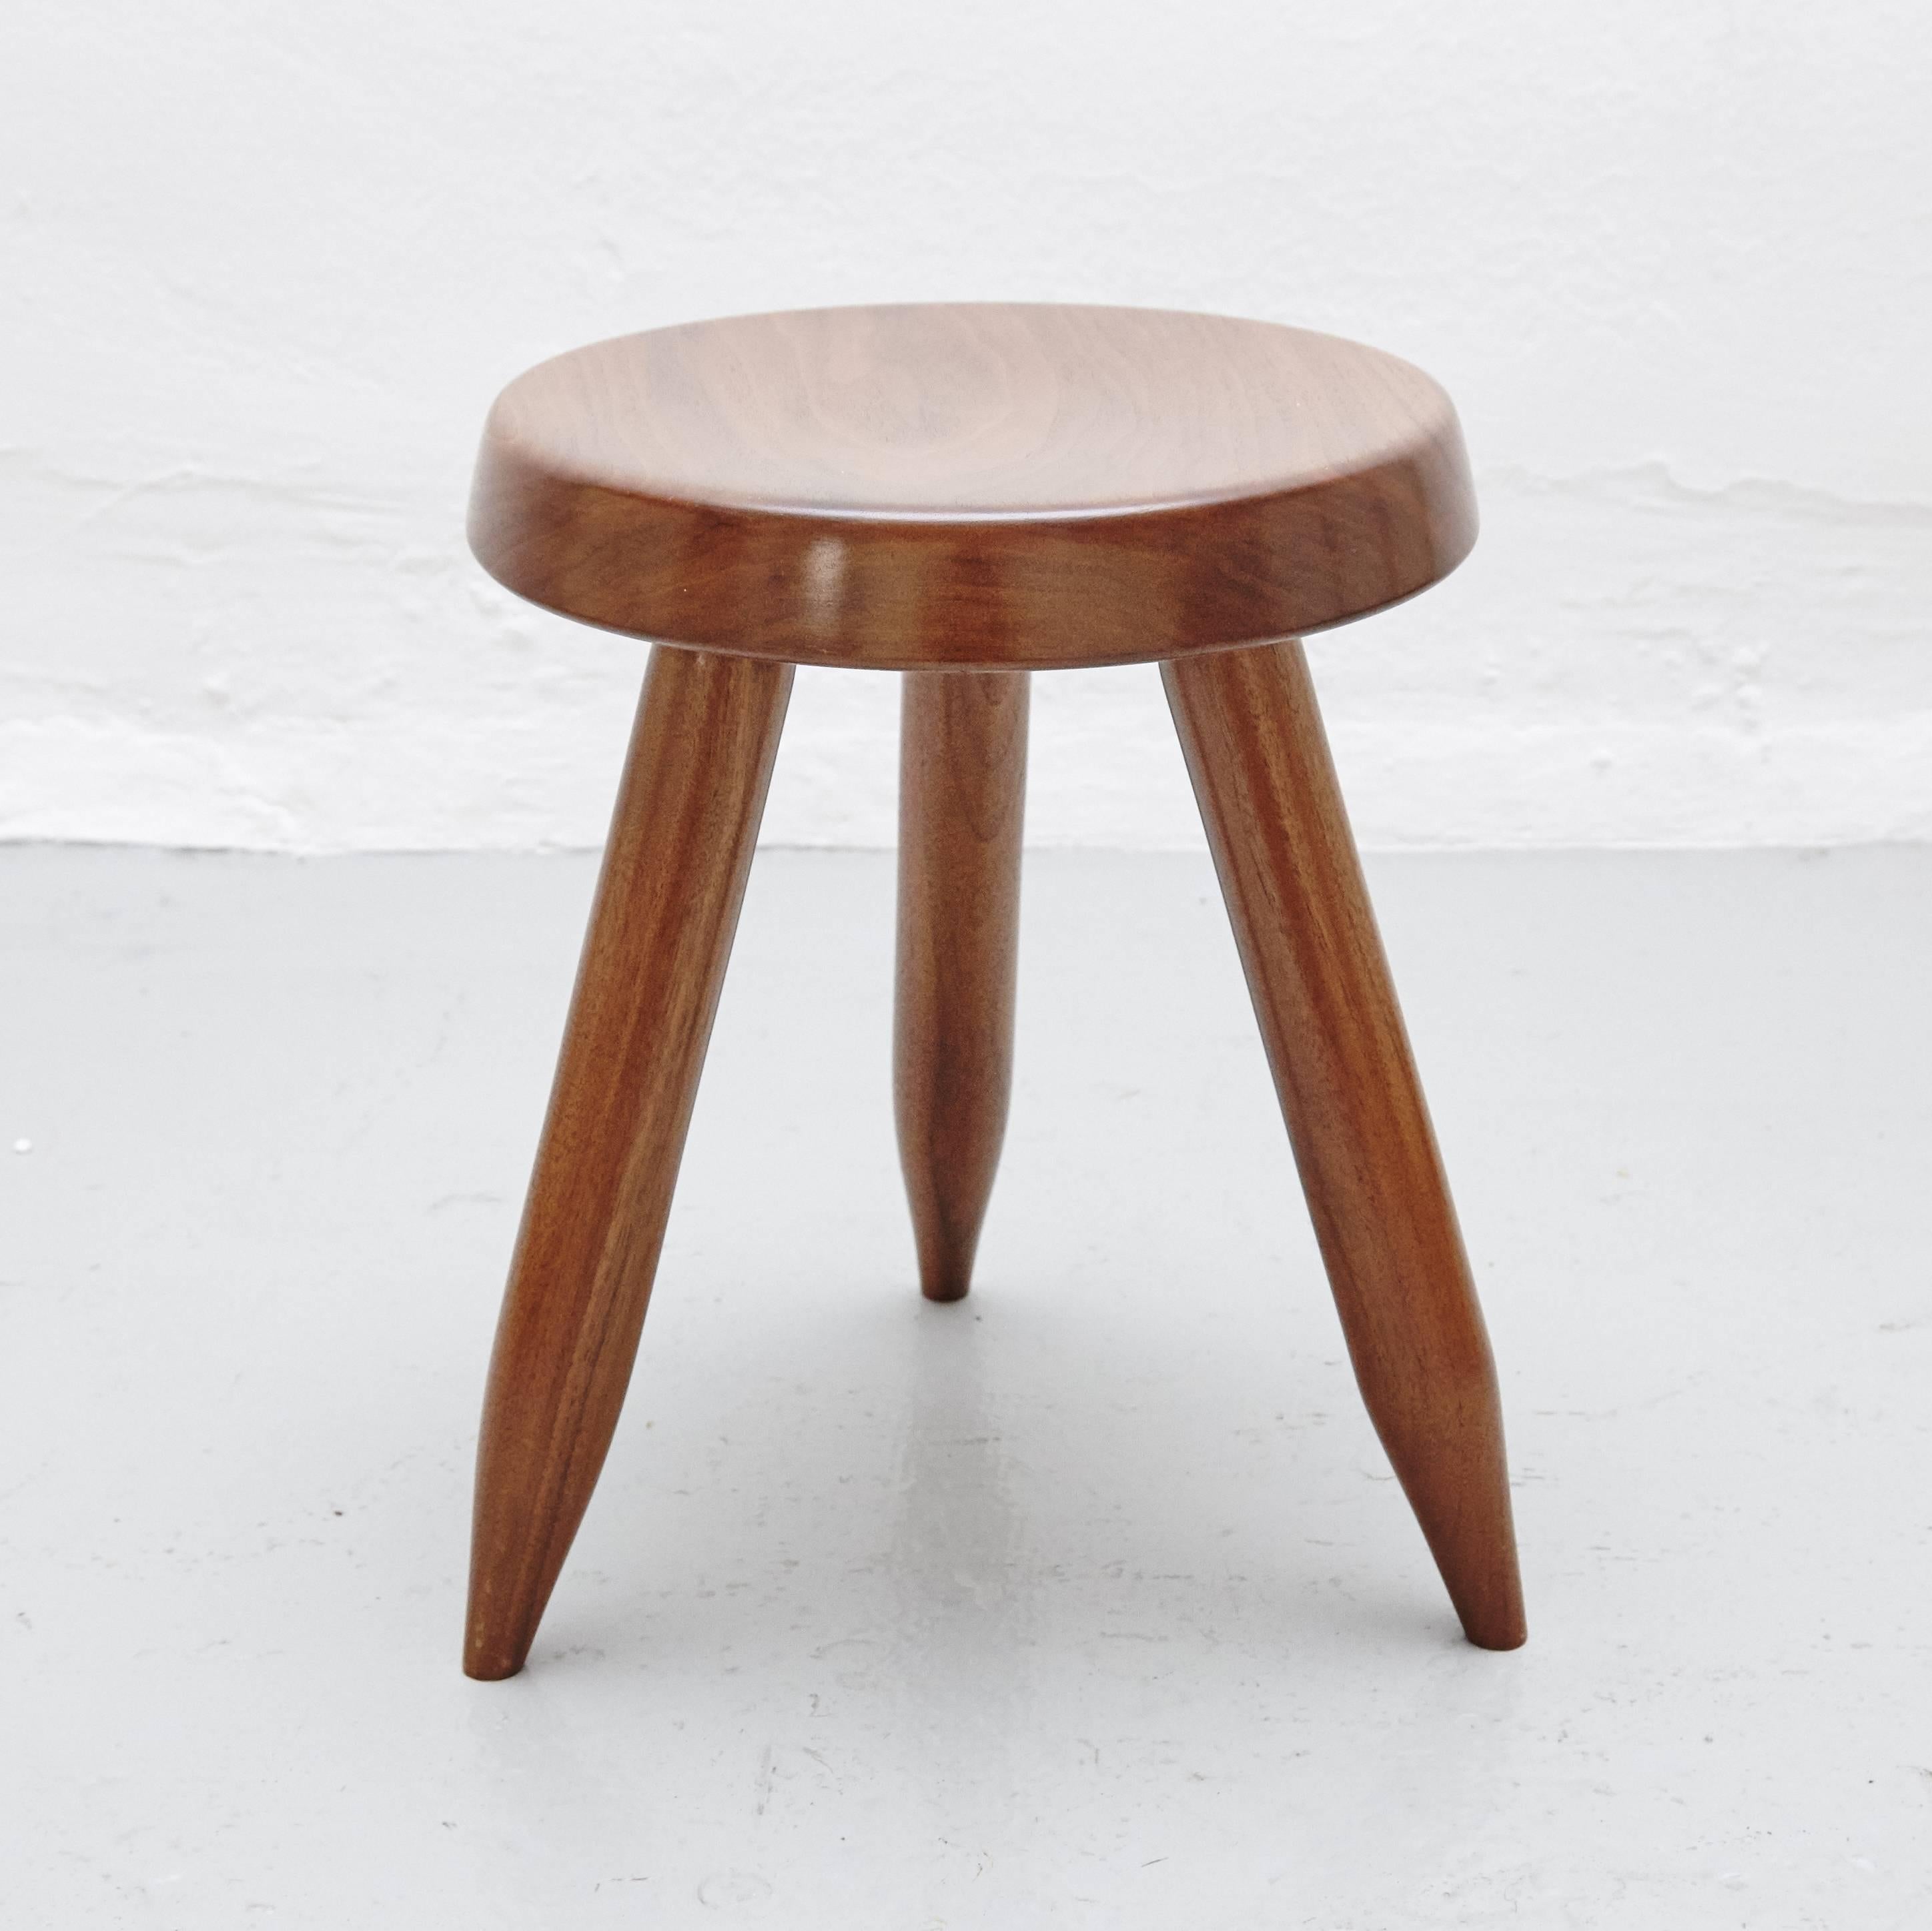 Stool designed in the style of Charlotte Perriand, made by unknown manufacturer.

In good original condition, preserving a beautiful patina, with minor wear consistent with age and use.

Charlotte Perriand (1903-1999). She was born in Paris in